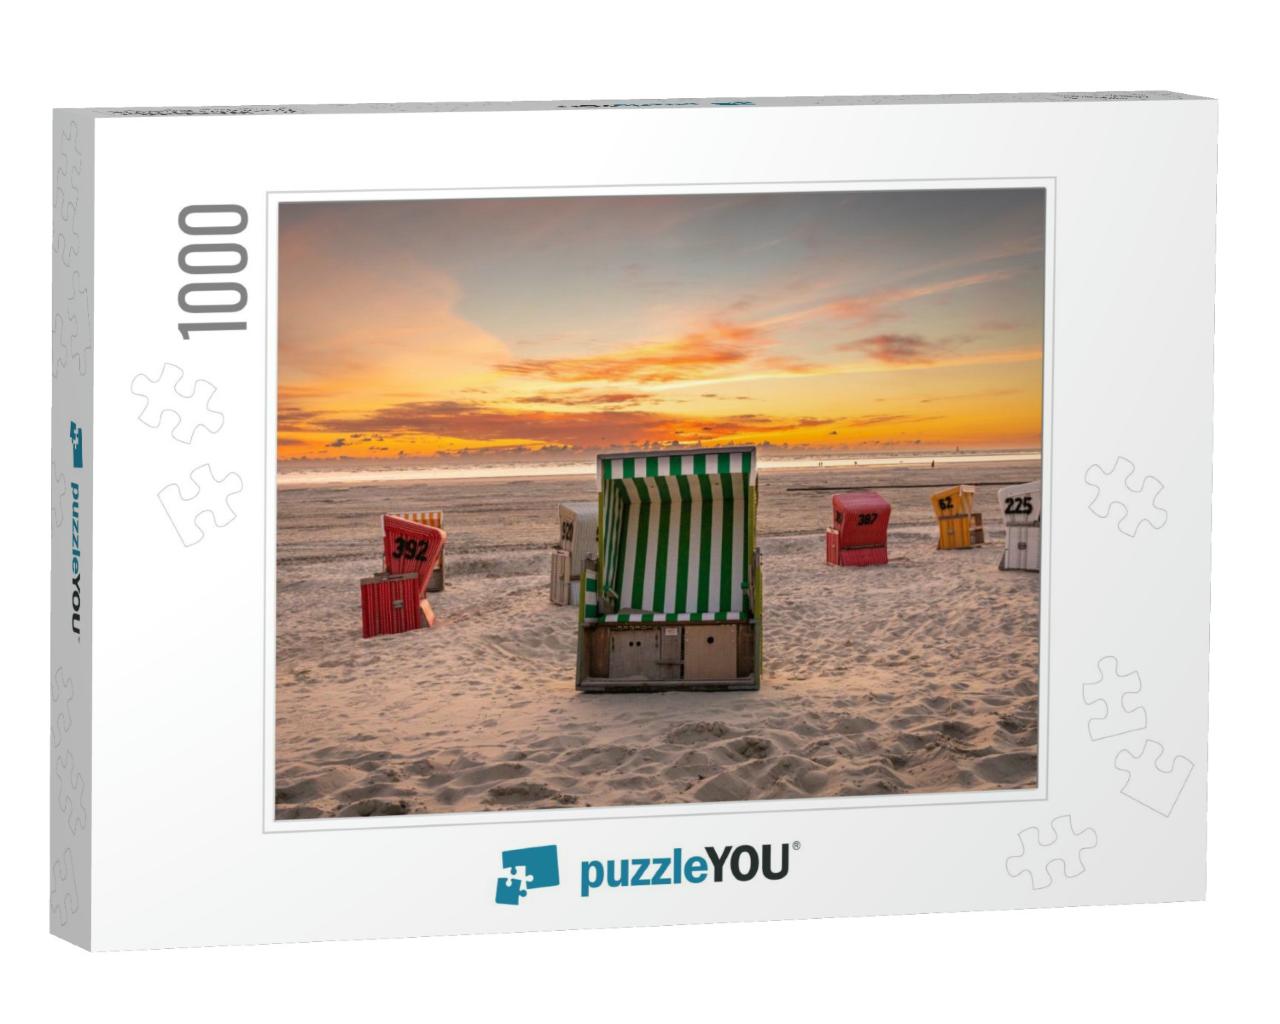 Empty Roofed Wicker Beach Chairs At Langeoog with Beautif... Jigsaw Puzzle with 1000 pieces